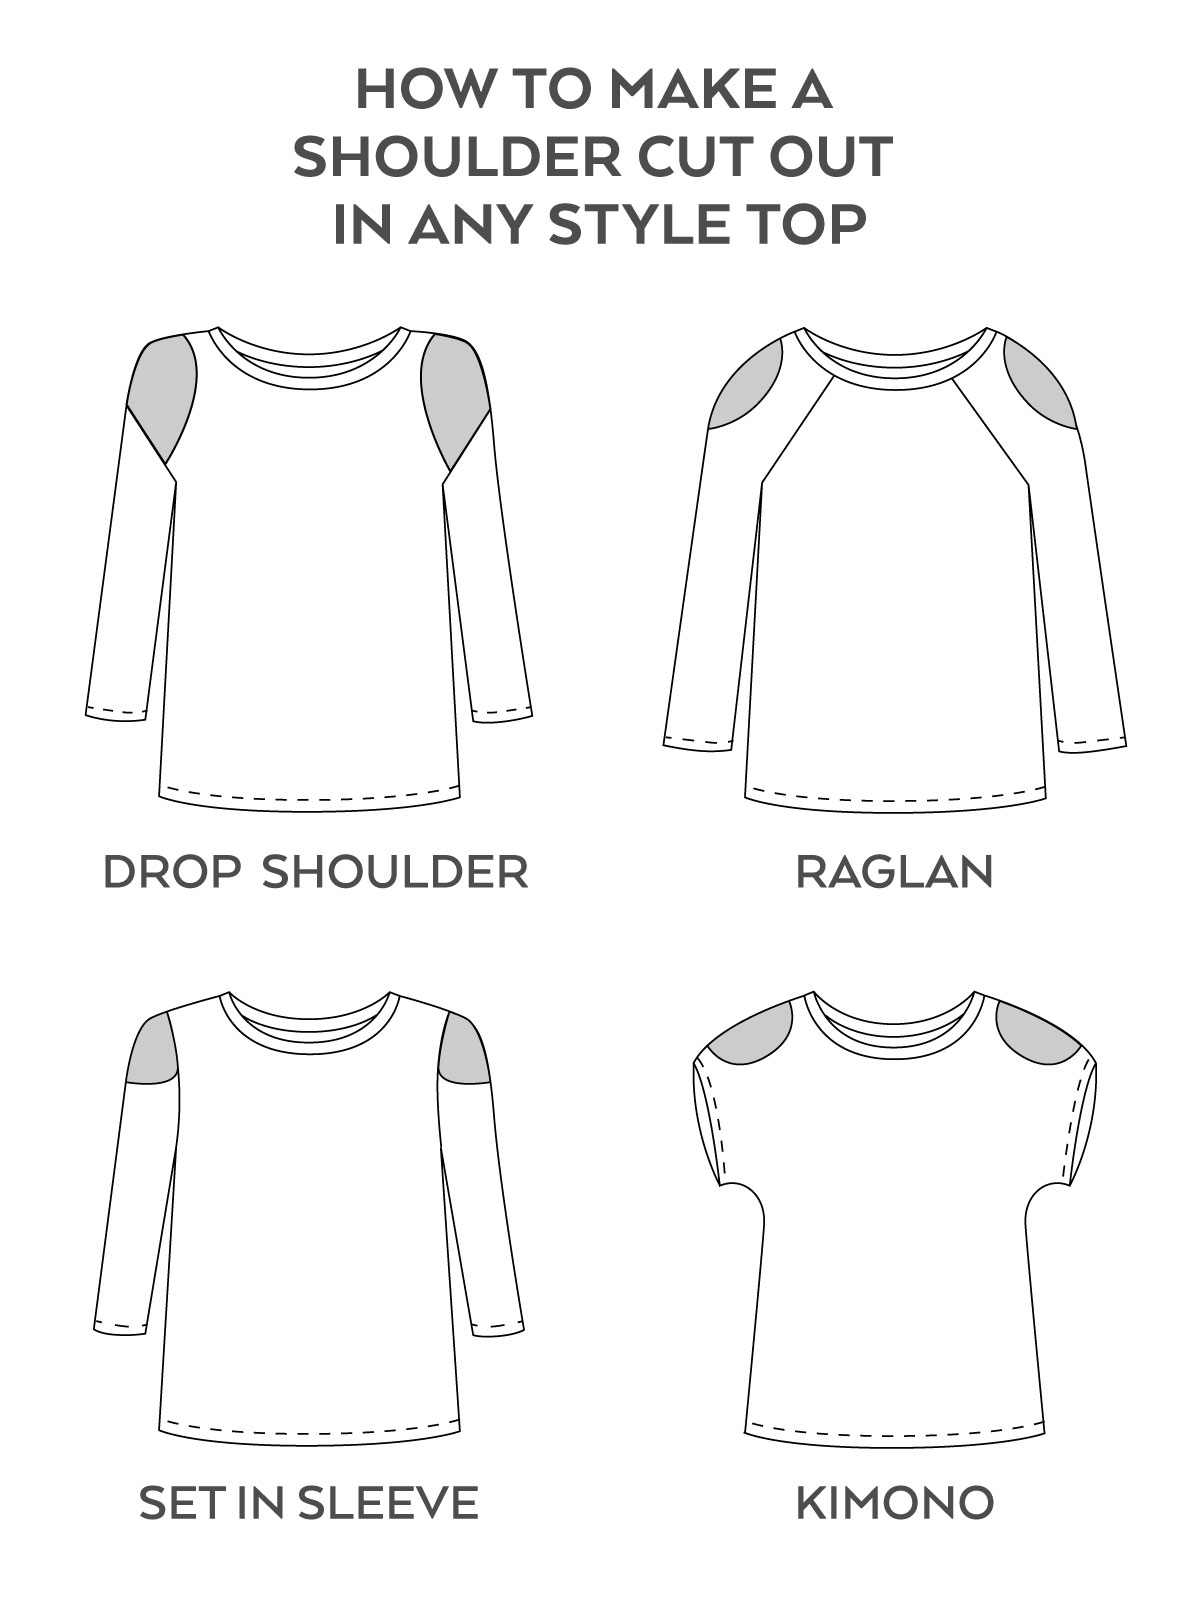 How to make off-the-shoulder tops stay in place